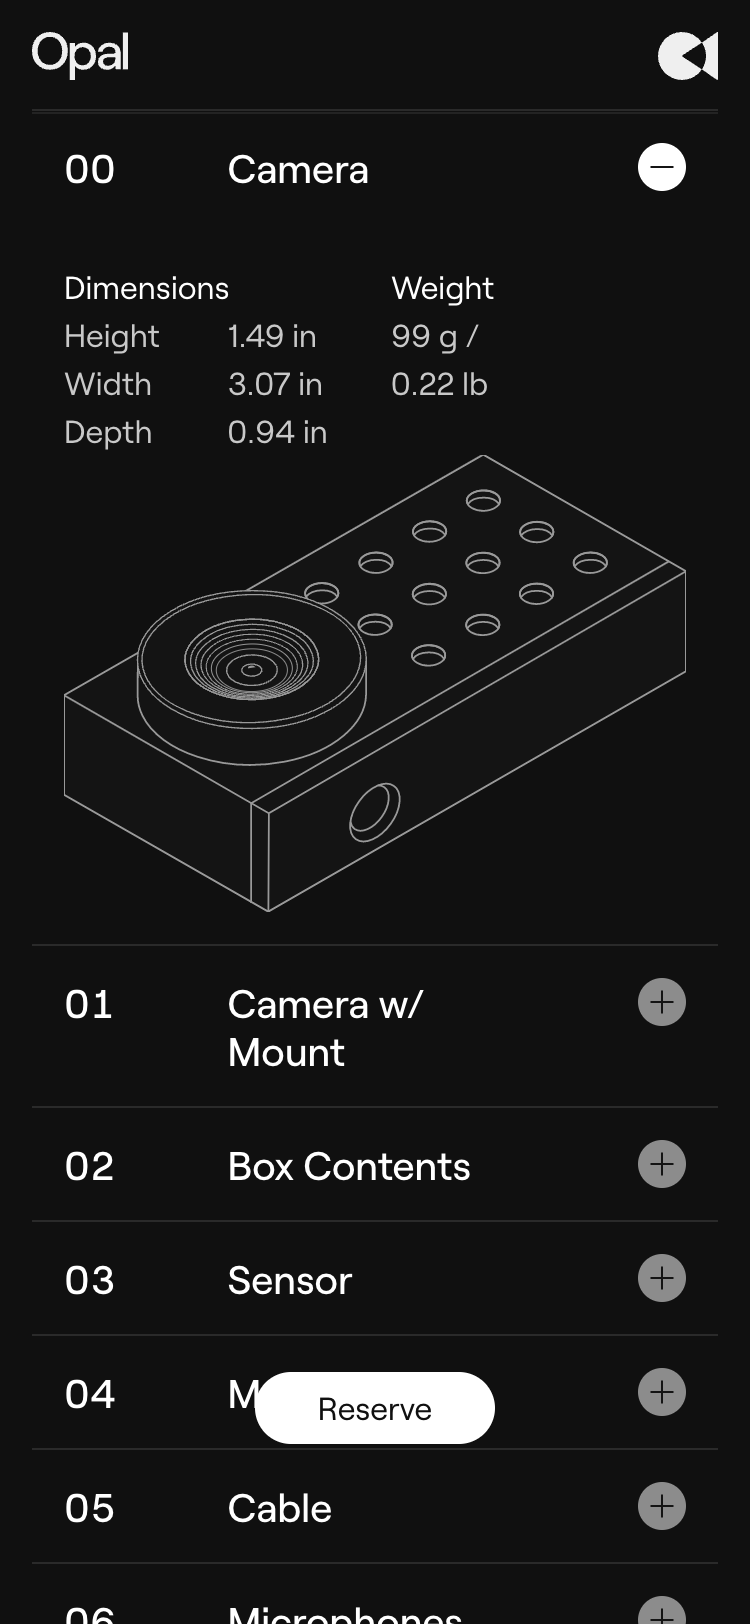 Mobile screenshot of the Opal website. The header contains the Opal logo. Underneath is a 3D outline of the Opal camera and details of the camera's dimensions and weight. There are additional collapsed sections underneath with titles such as 'Box Contents' and 'Cable'. At the bottom of the screen there is a 'Reserve' button.